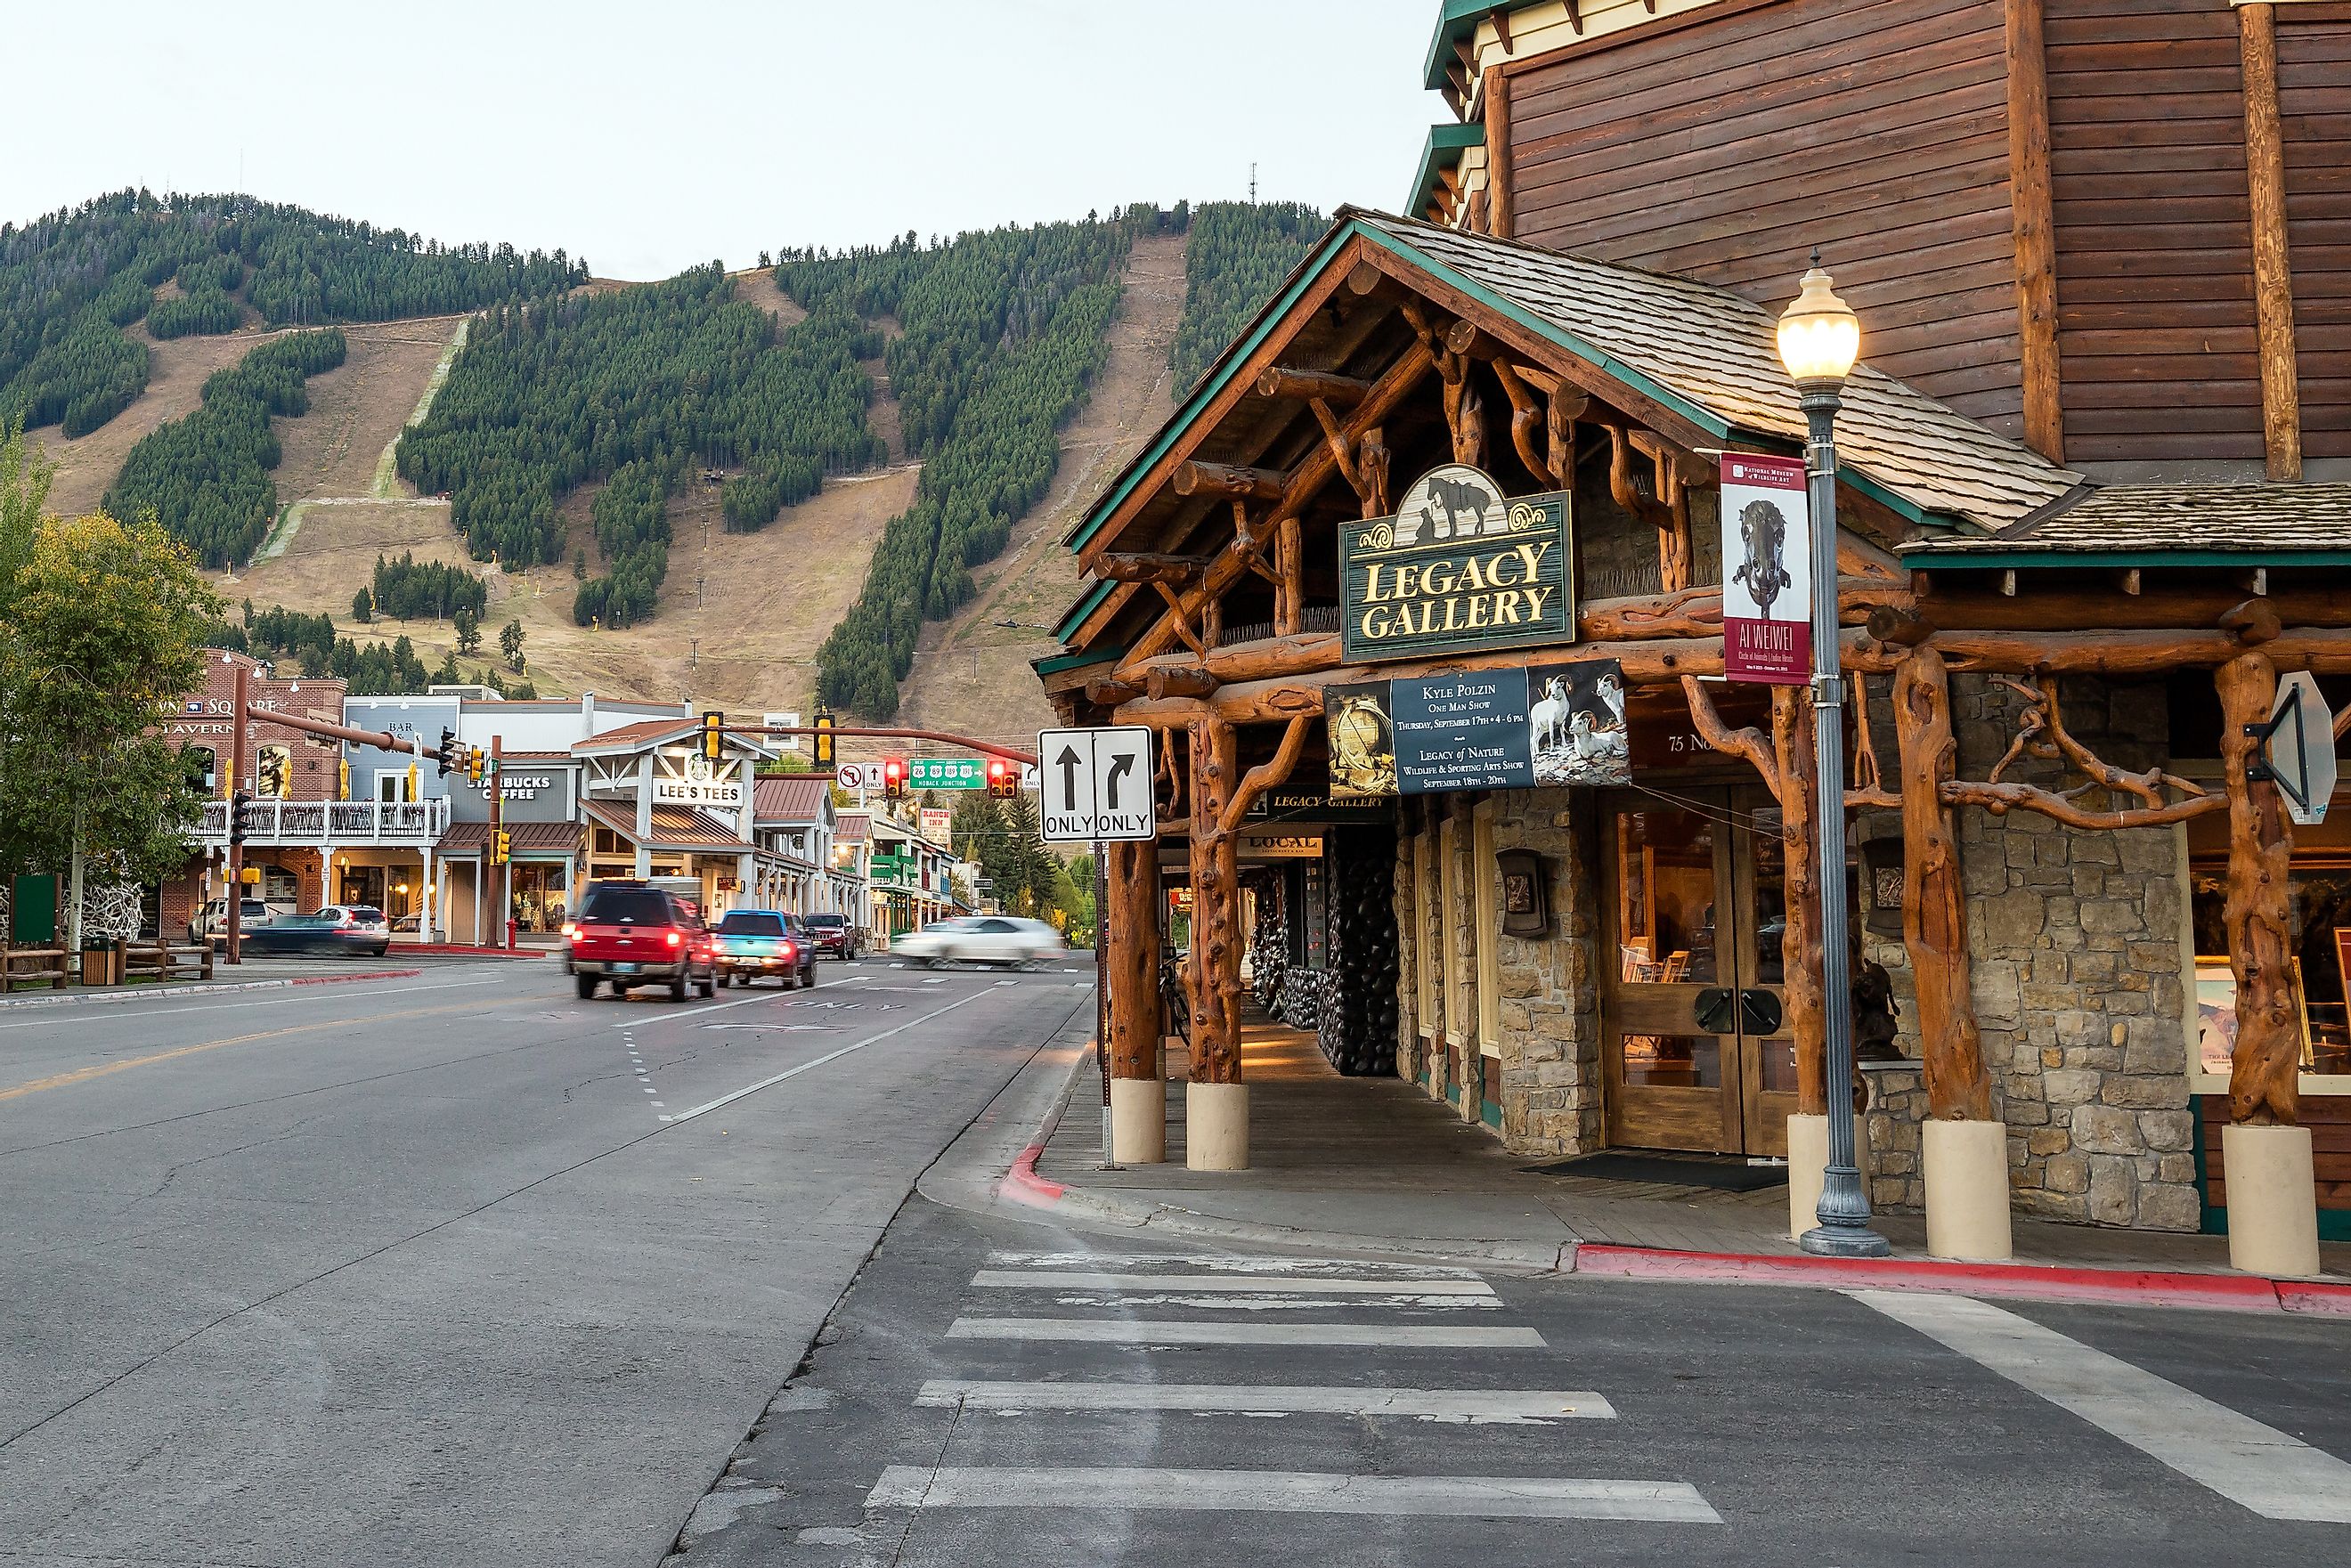 Downtown Jackson Hole Wyoming USA on September 28, 2015 It was named after David Edward "Davey" Jackson who trapped beaver in the area in the early nineteenth century.